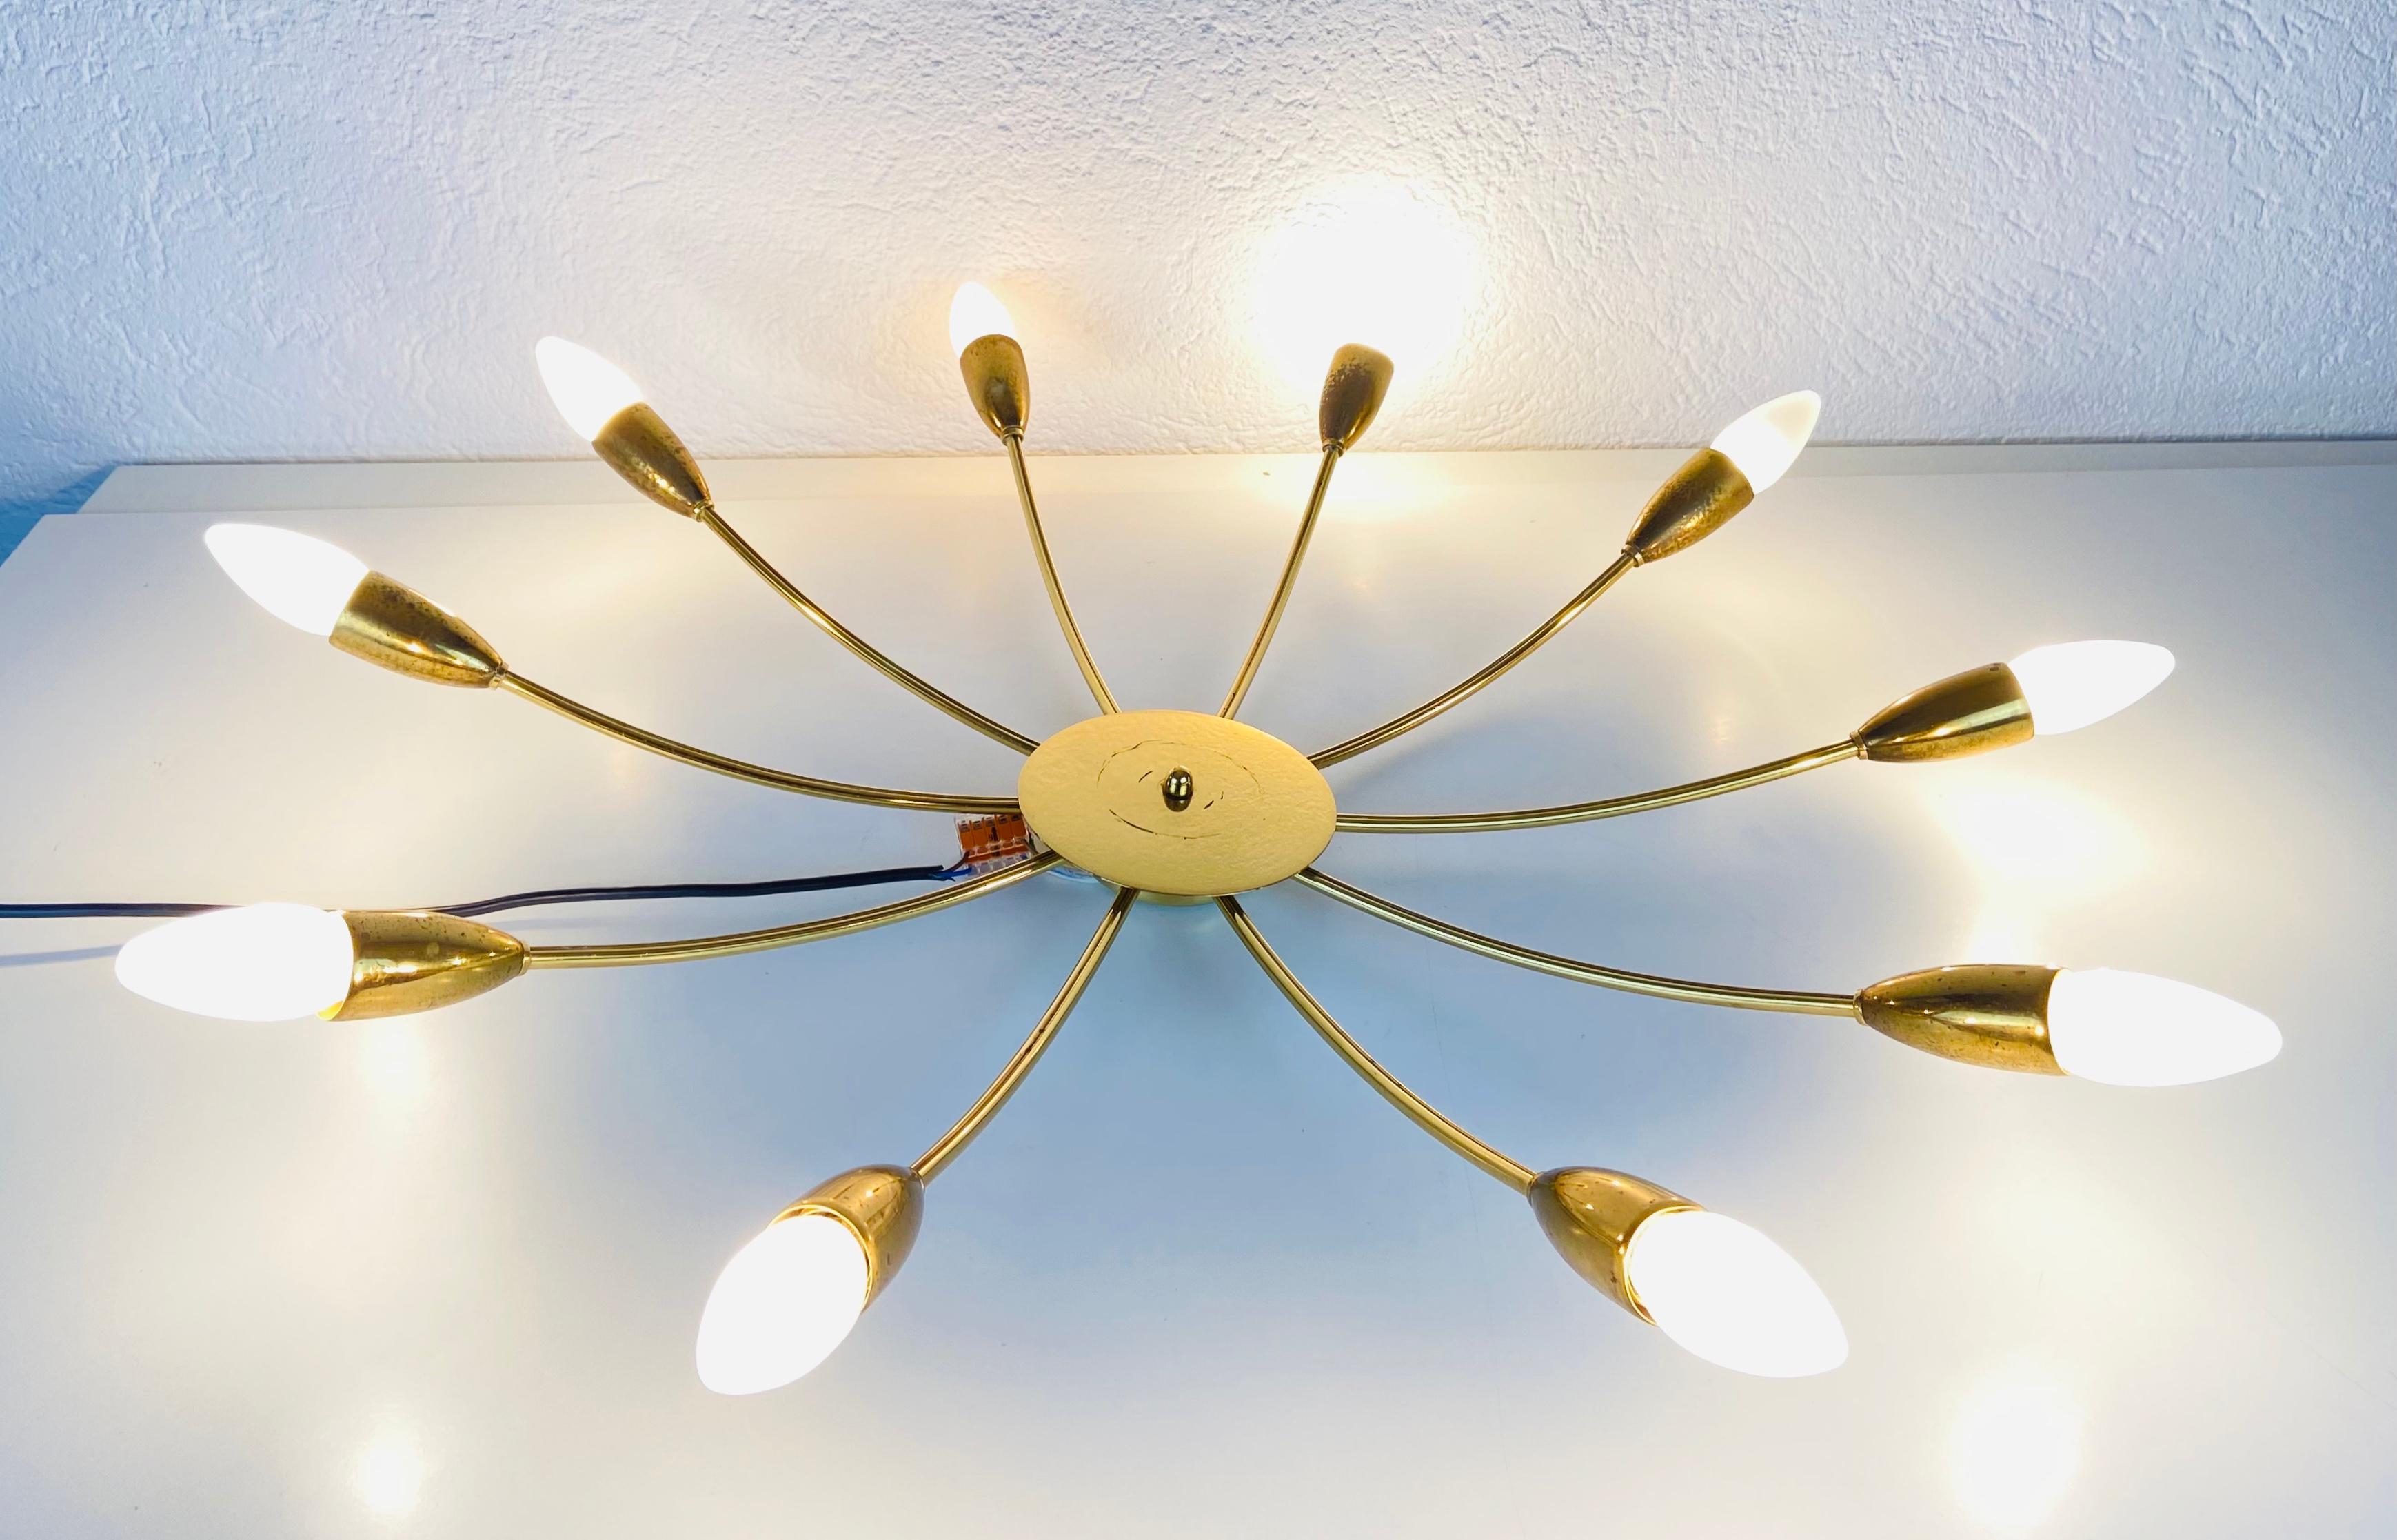 A Sputnik chandelier made in Germany in the 1950s. It is fascinating with its ten brass arms, each of it with an E14 light bulb. The shape of the light is similar to a spider.

The light requires 10 E14 light bulbs. Works with both 120/220 V. Good